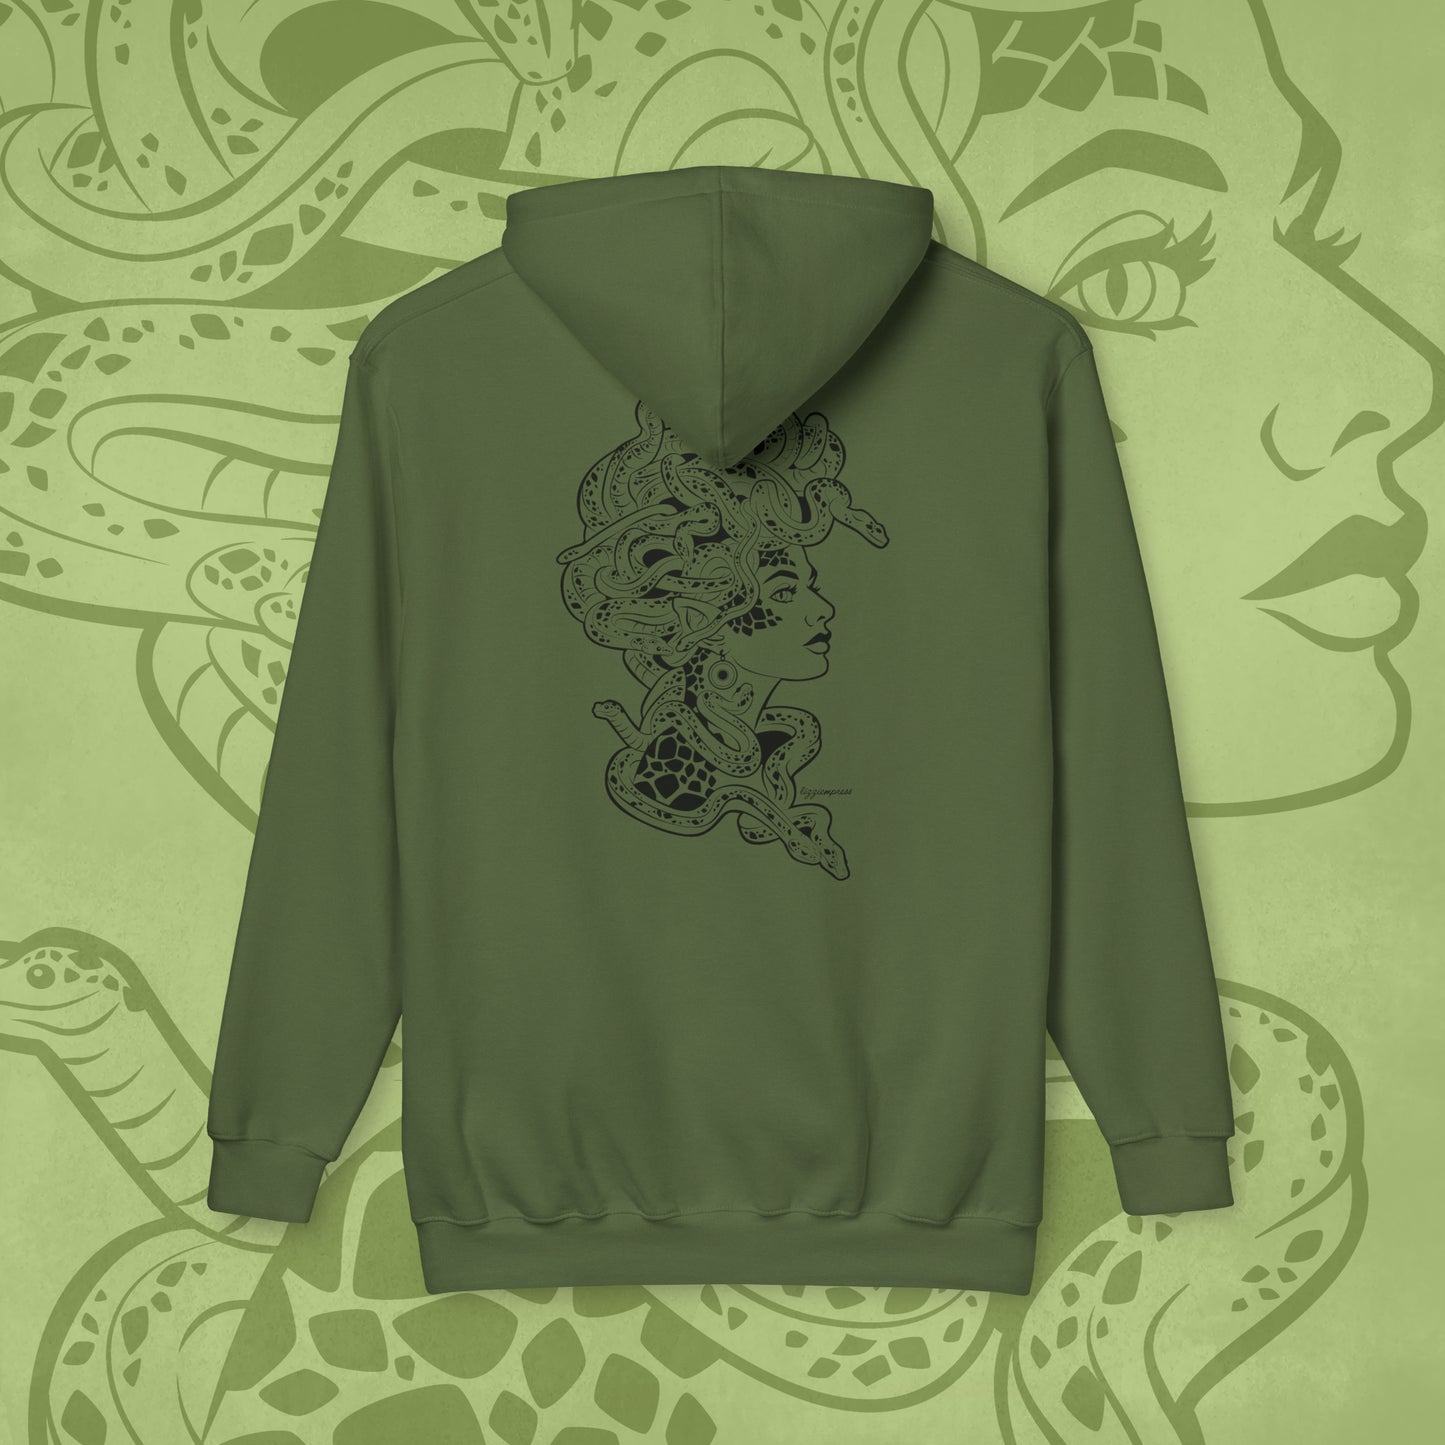 Exclusive Medusa Hooded Sweatshirt Made in the USA | 3 Colors | S-4XL